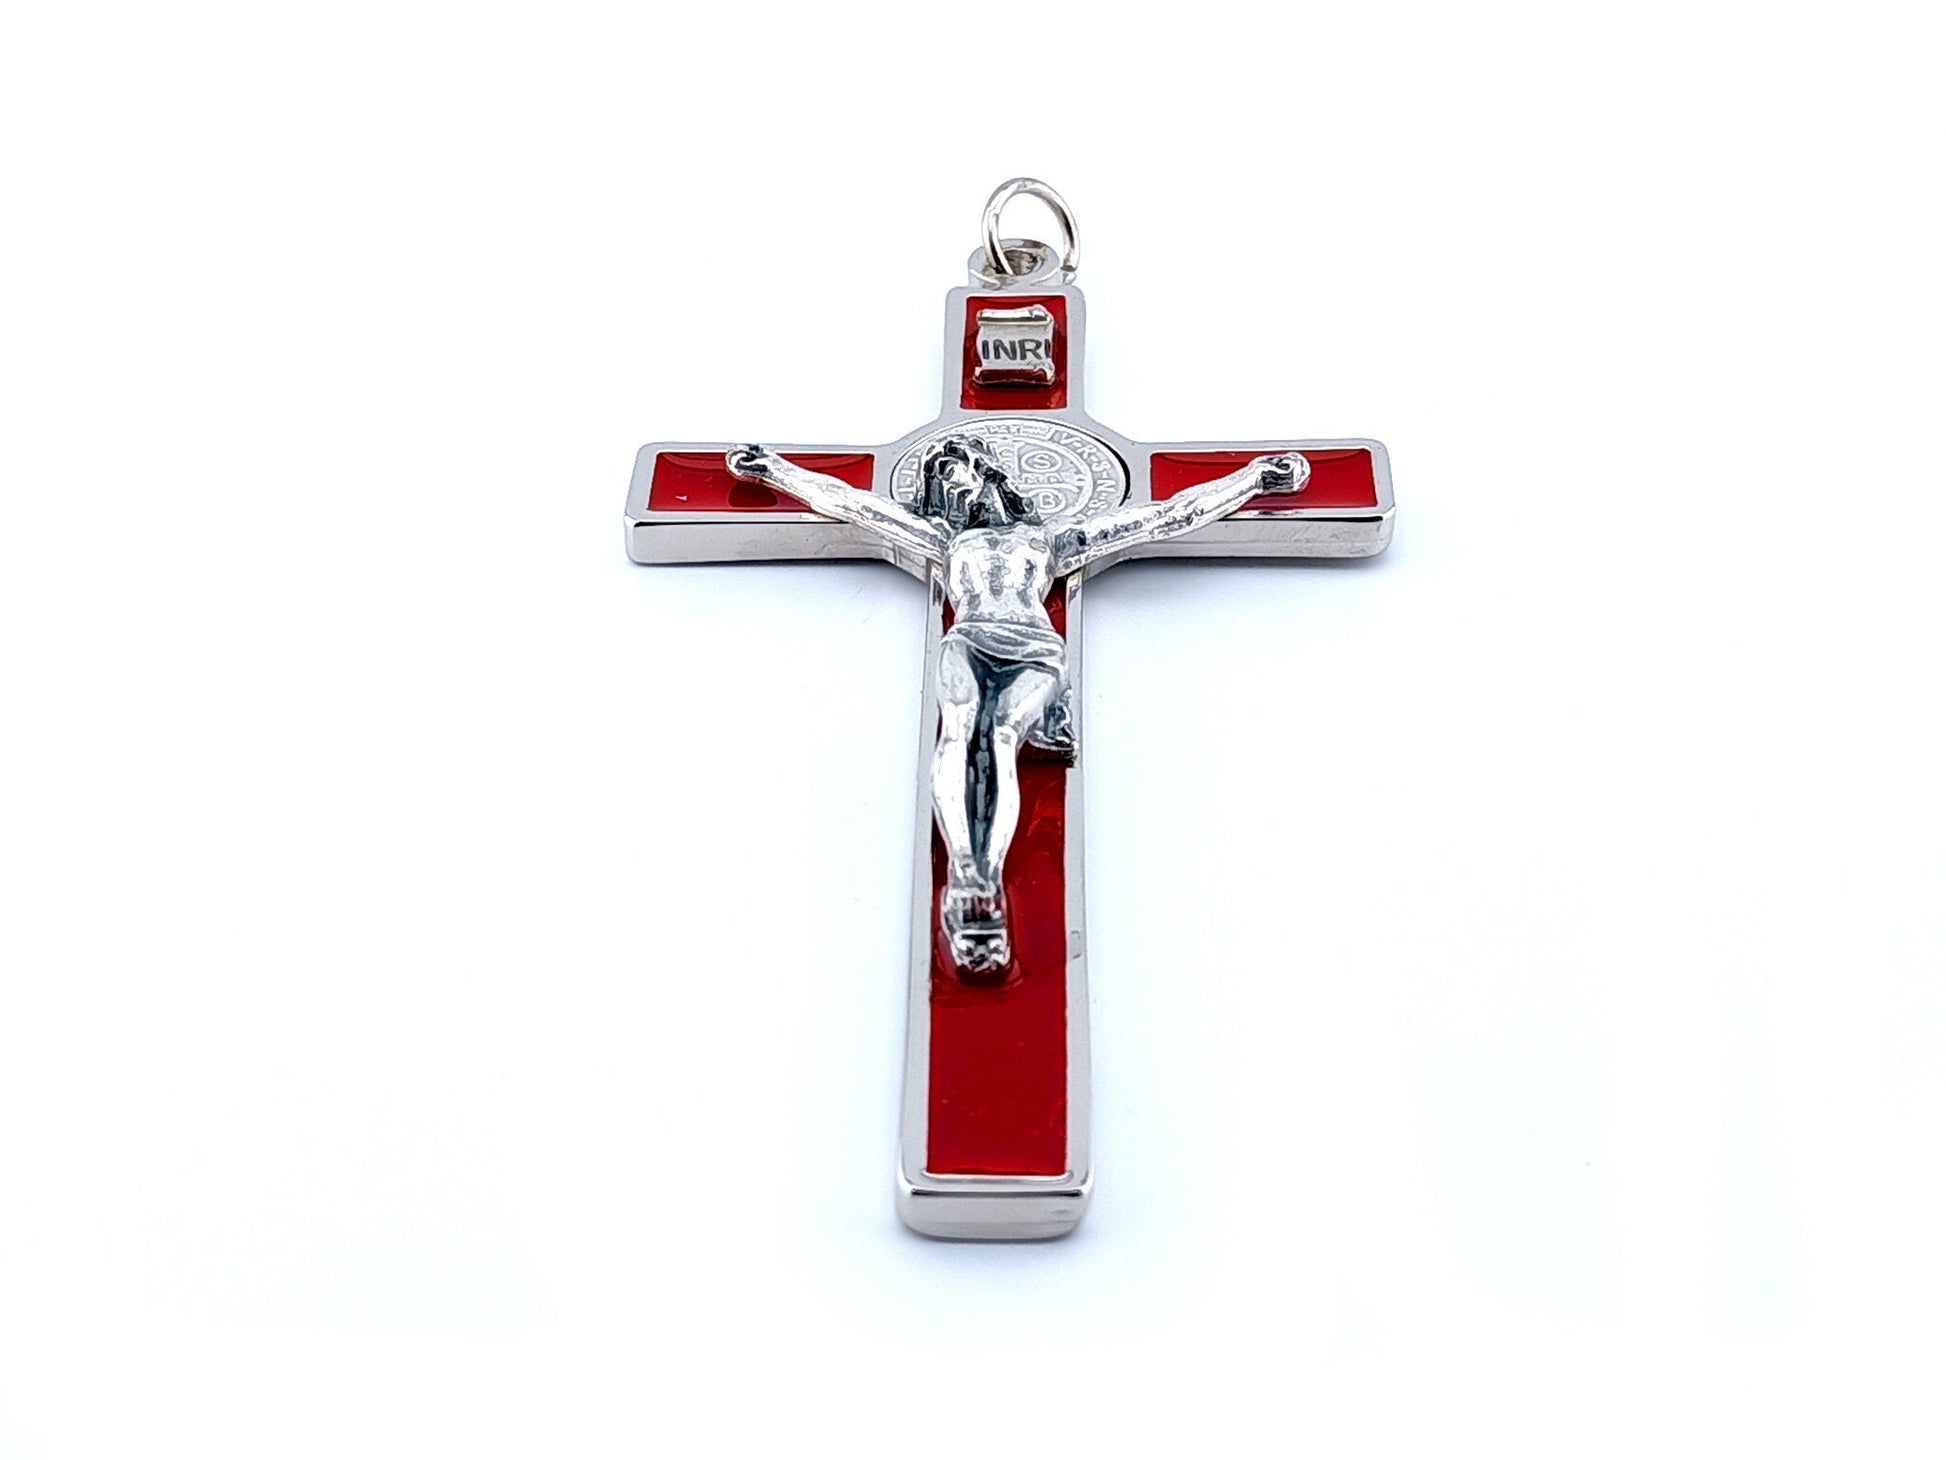 Unique rosary beads red enamel and silver 4.5" Saint Benedict wall crucifix.